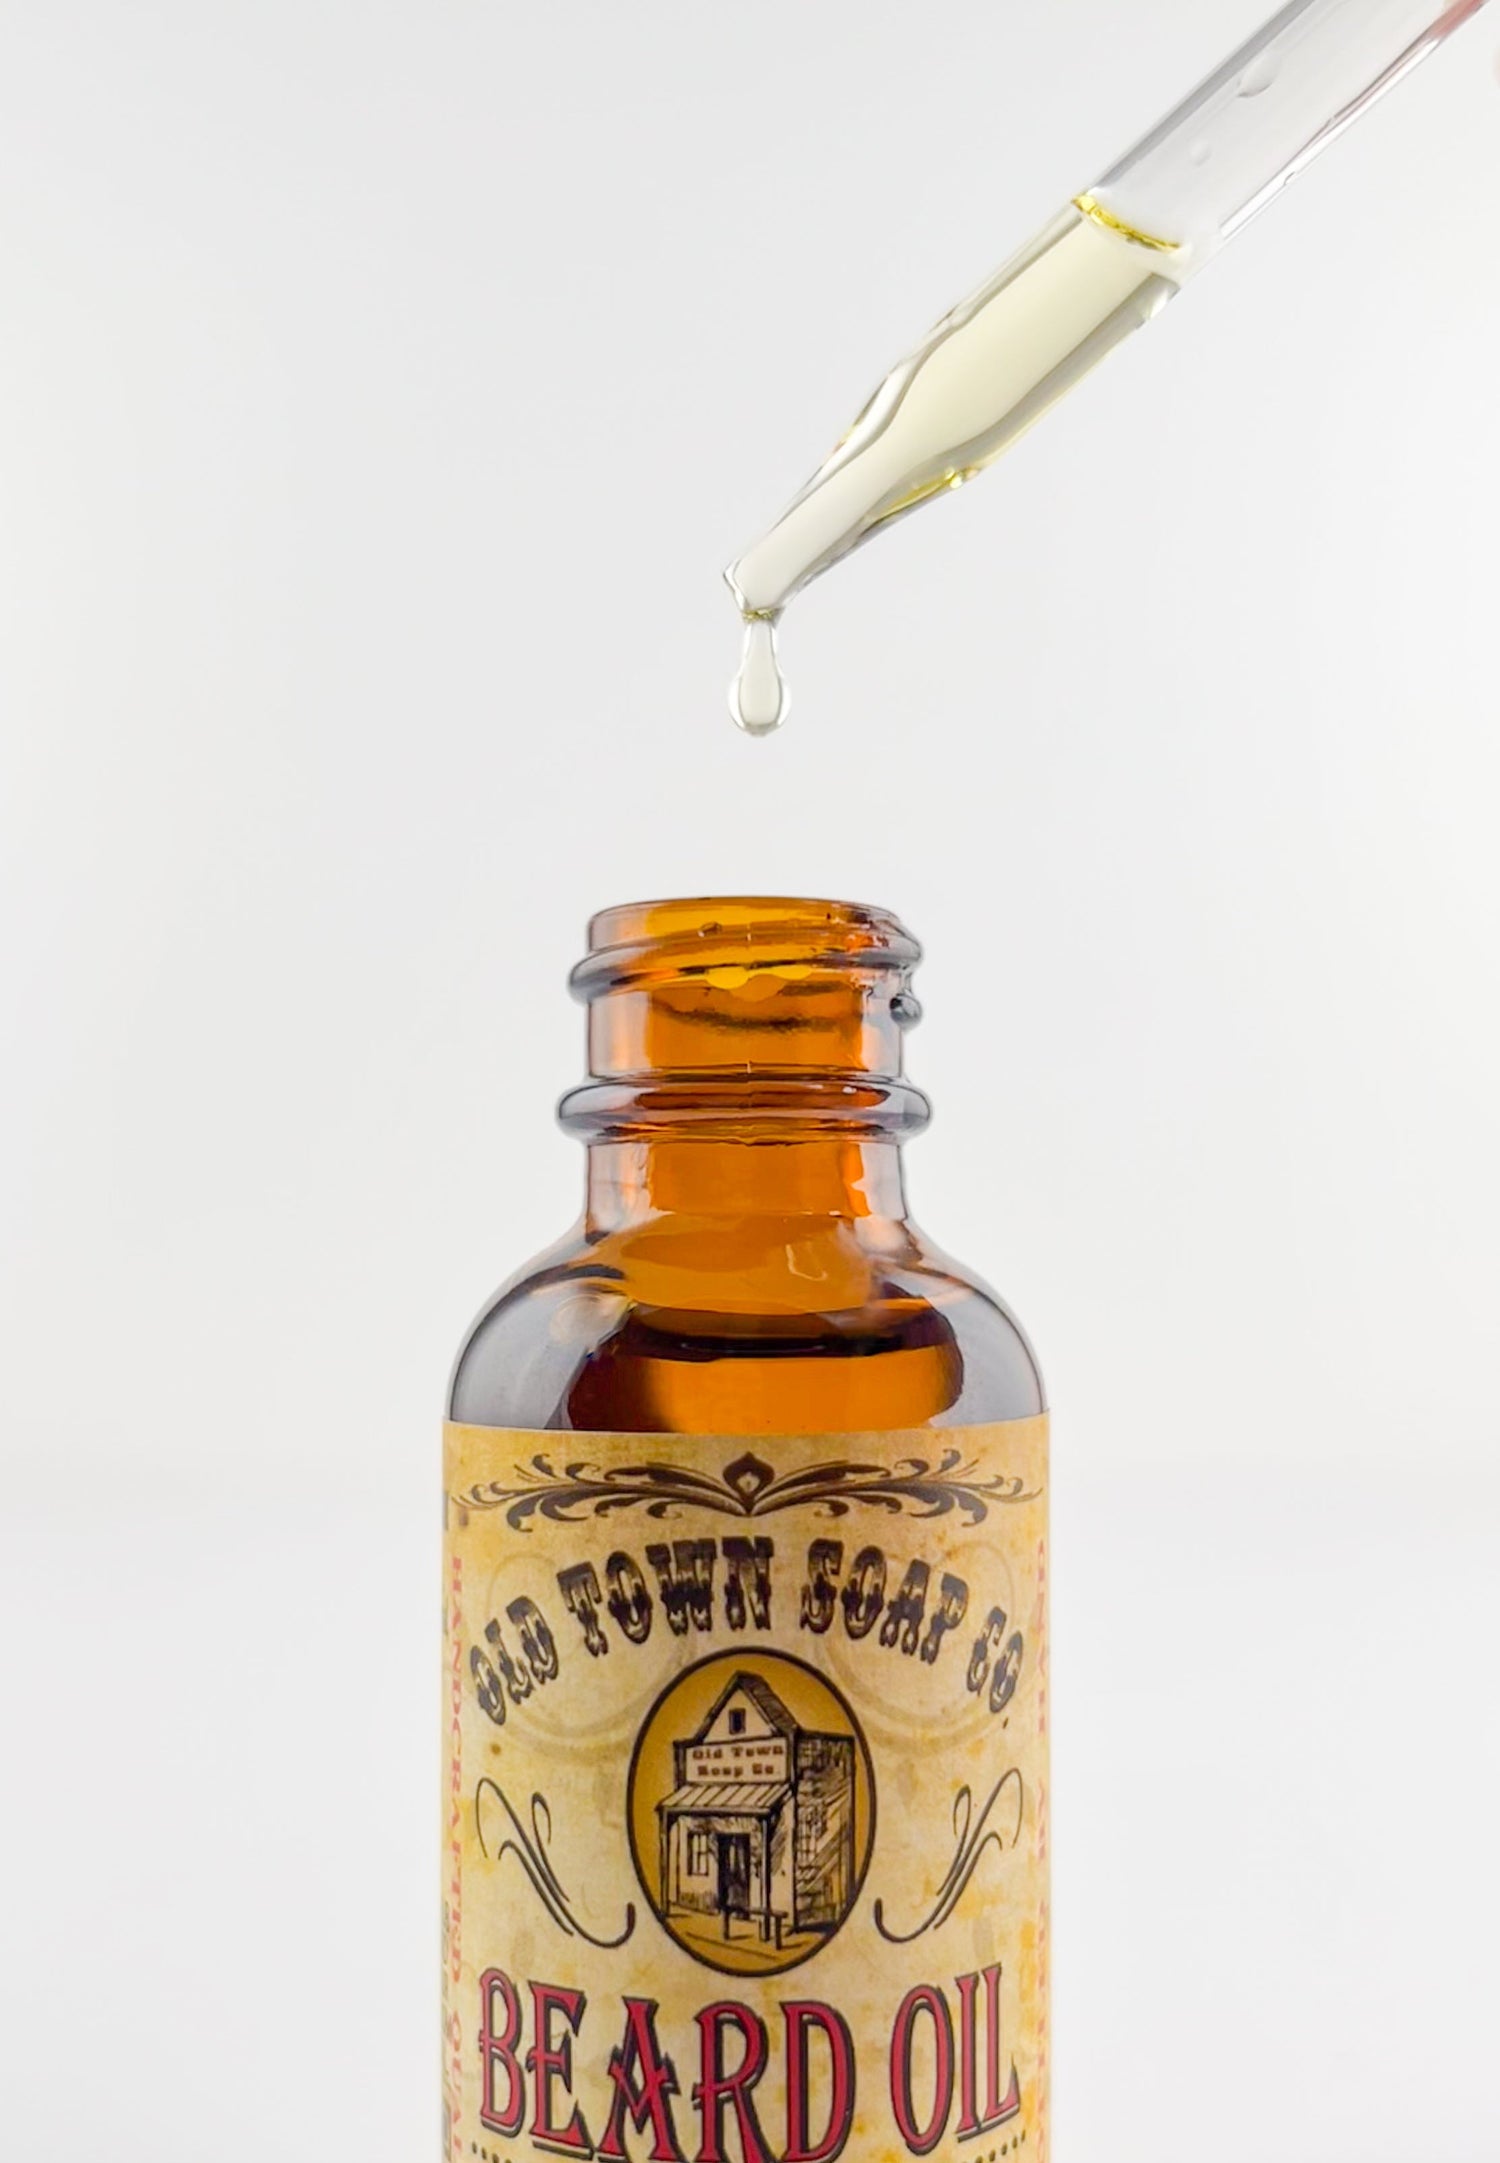 The Cowboy Beard Oil - Old Town Soap Co.